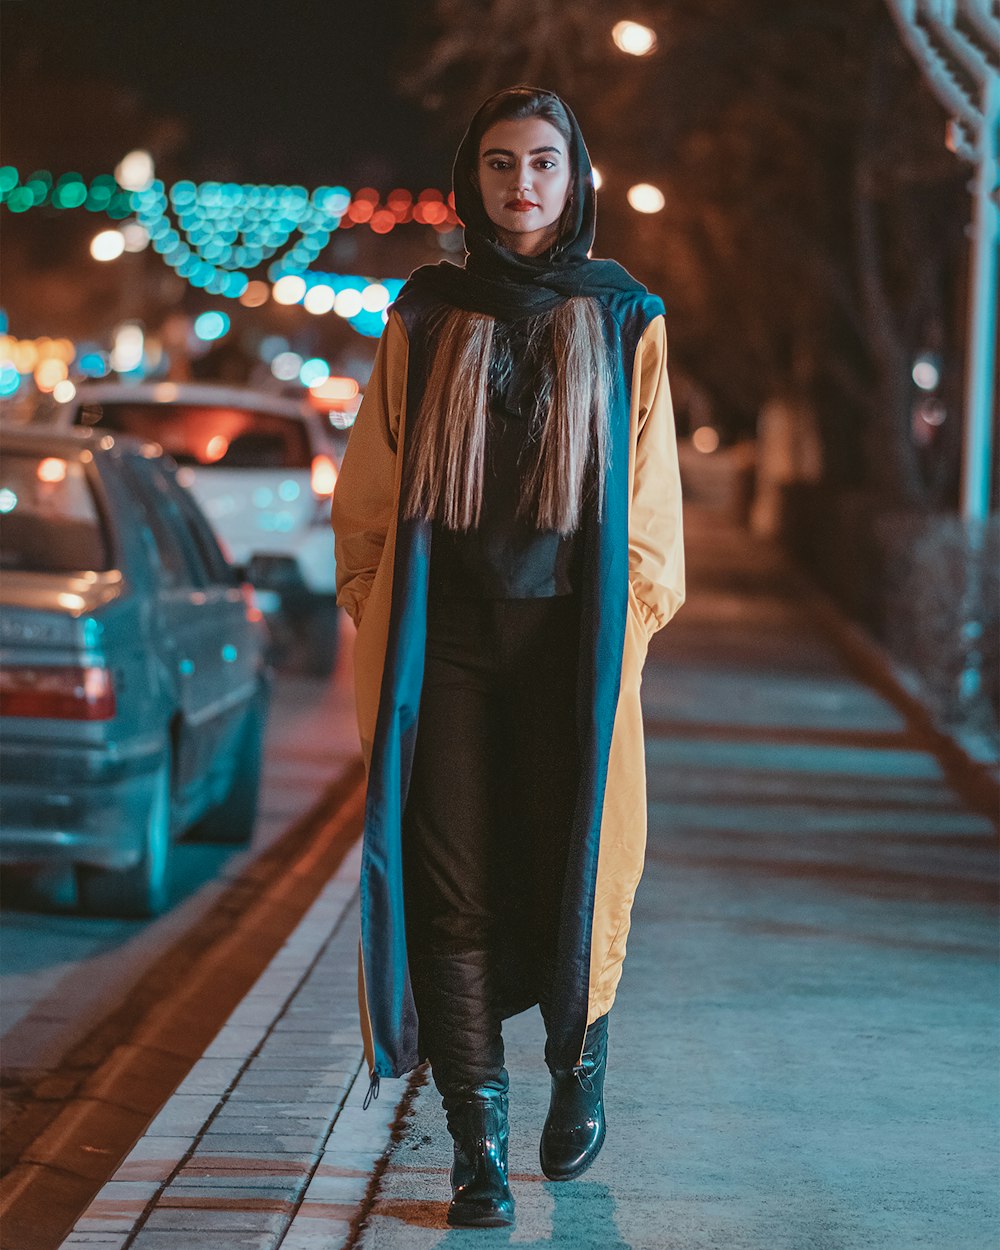 woman in black coat and black hijab standing on sidewalk during night time